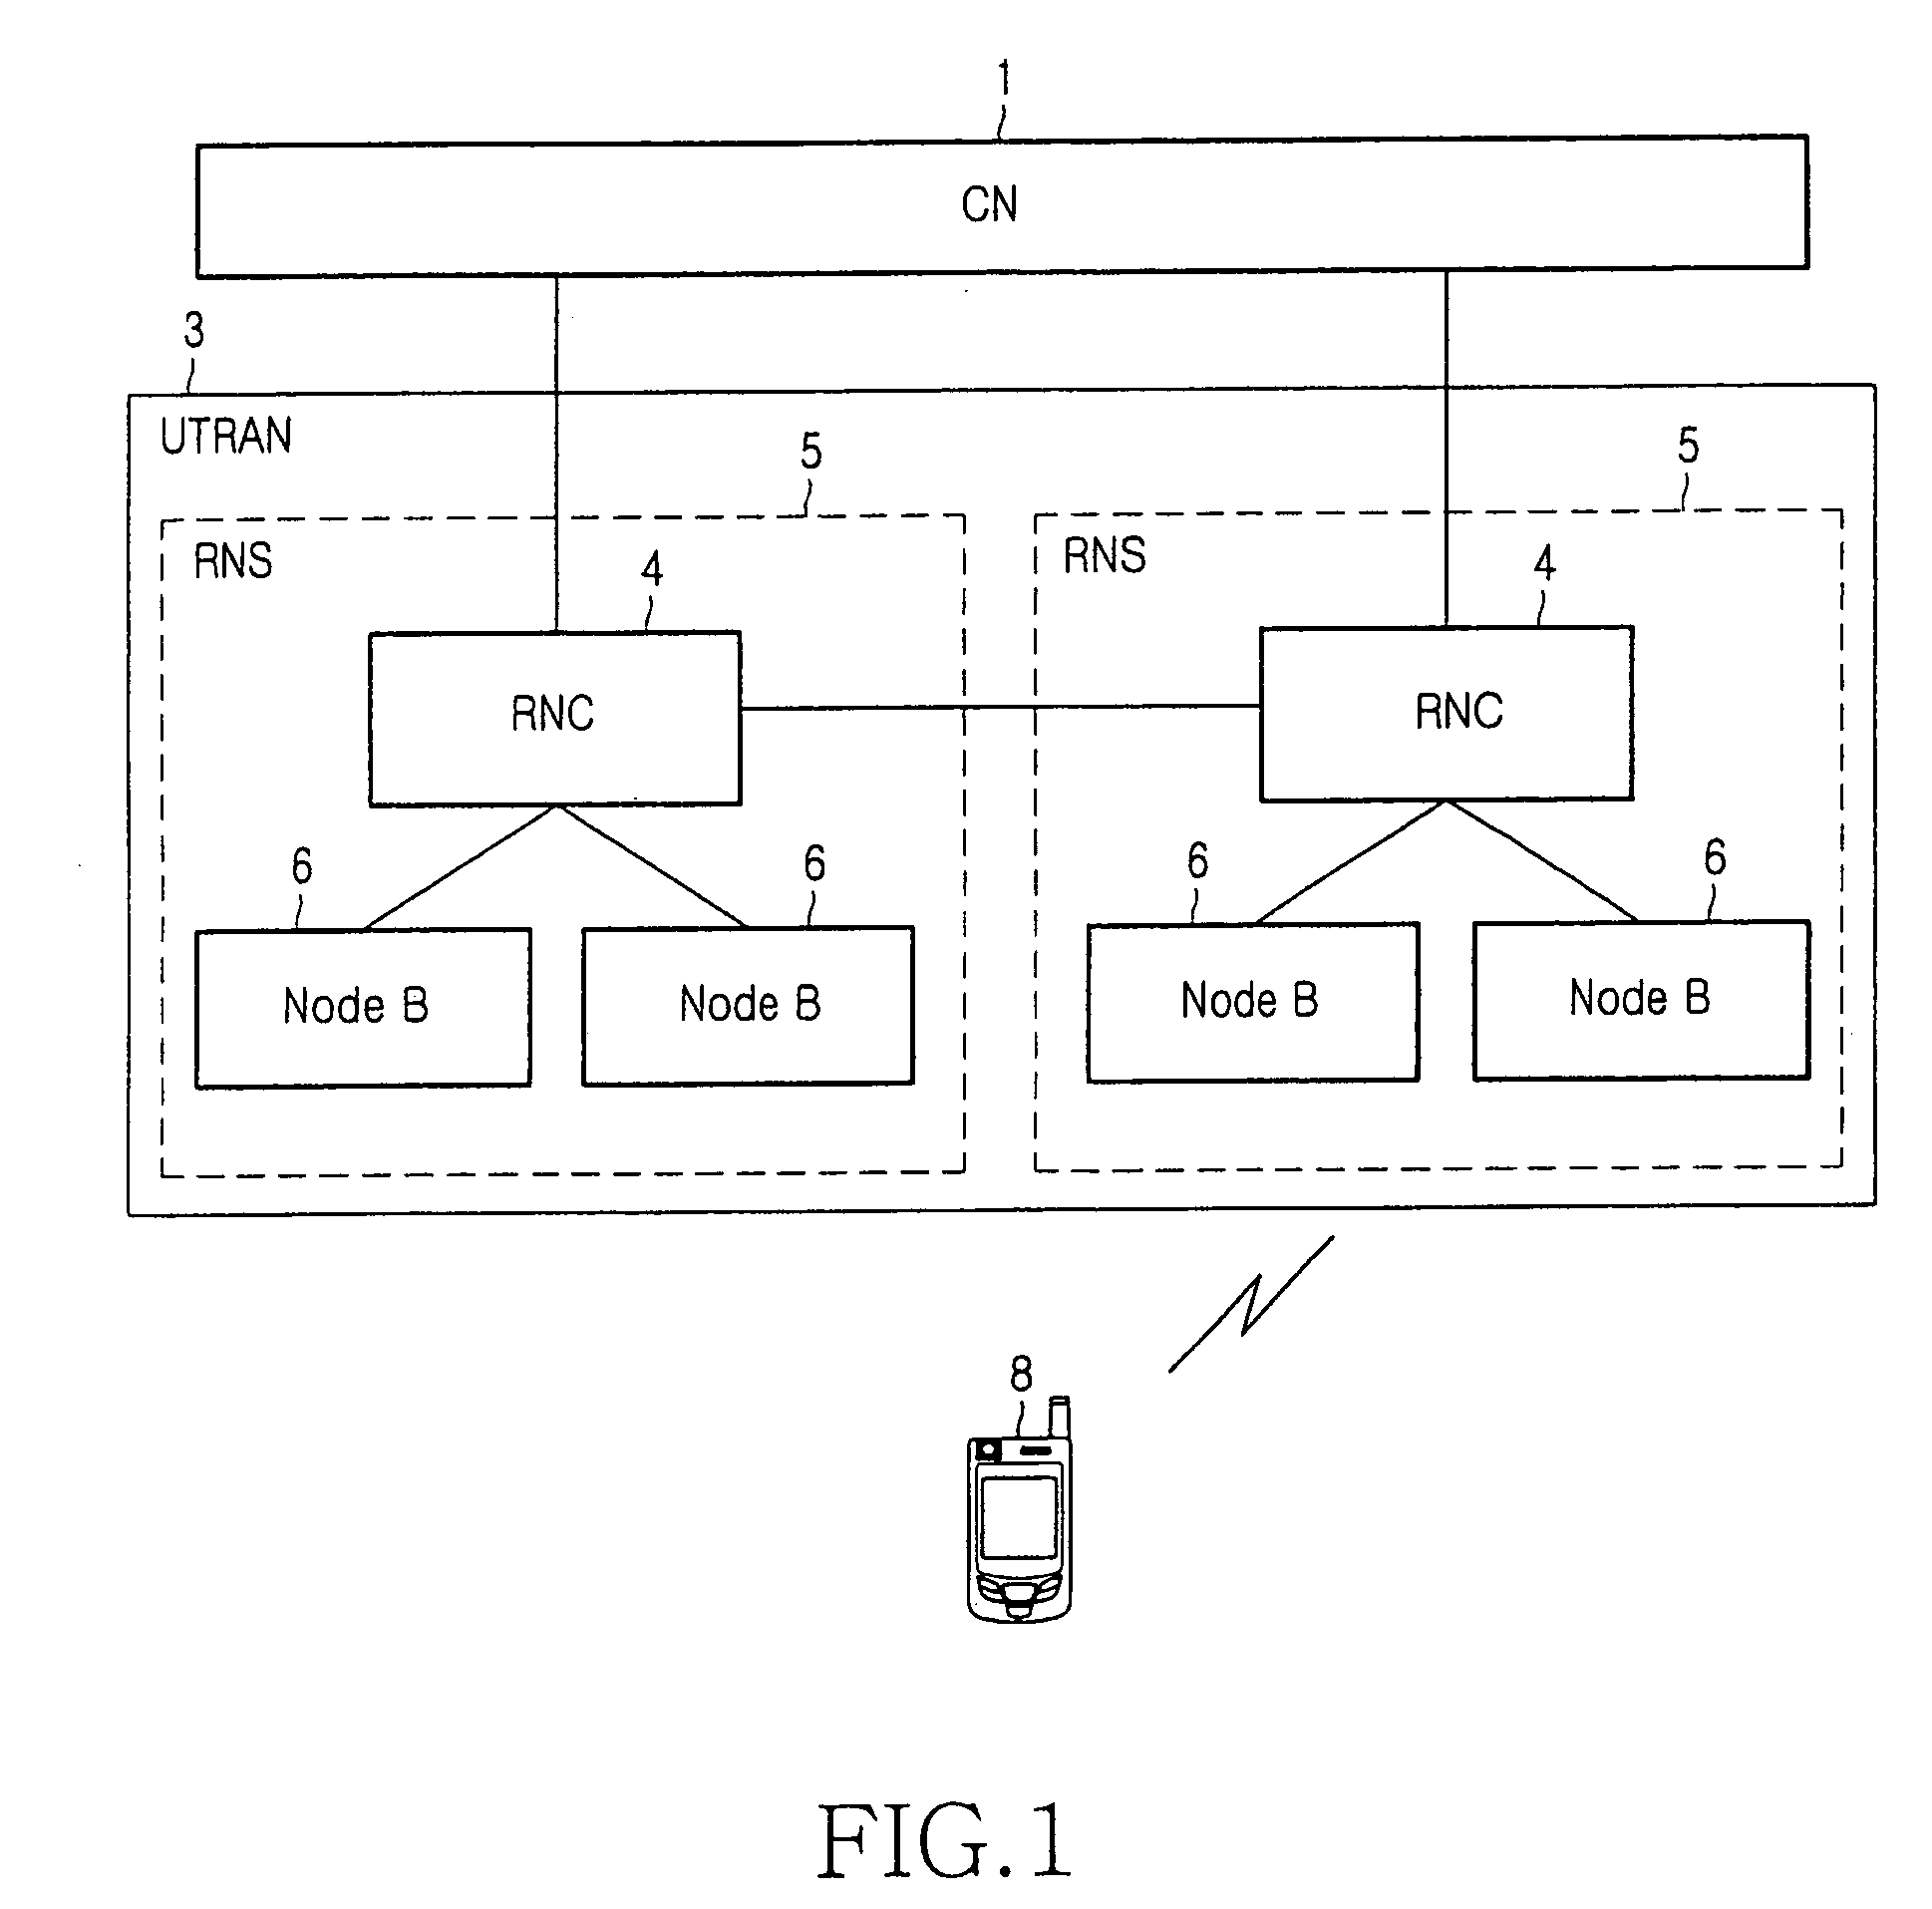 Apparatus and a method for distributing a transmission power in a cellular communications network